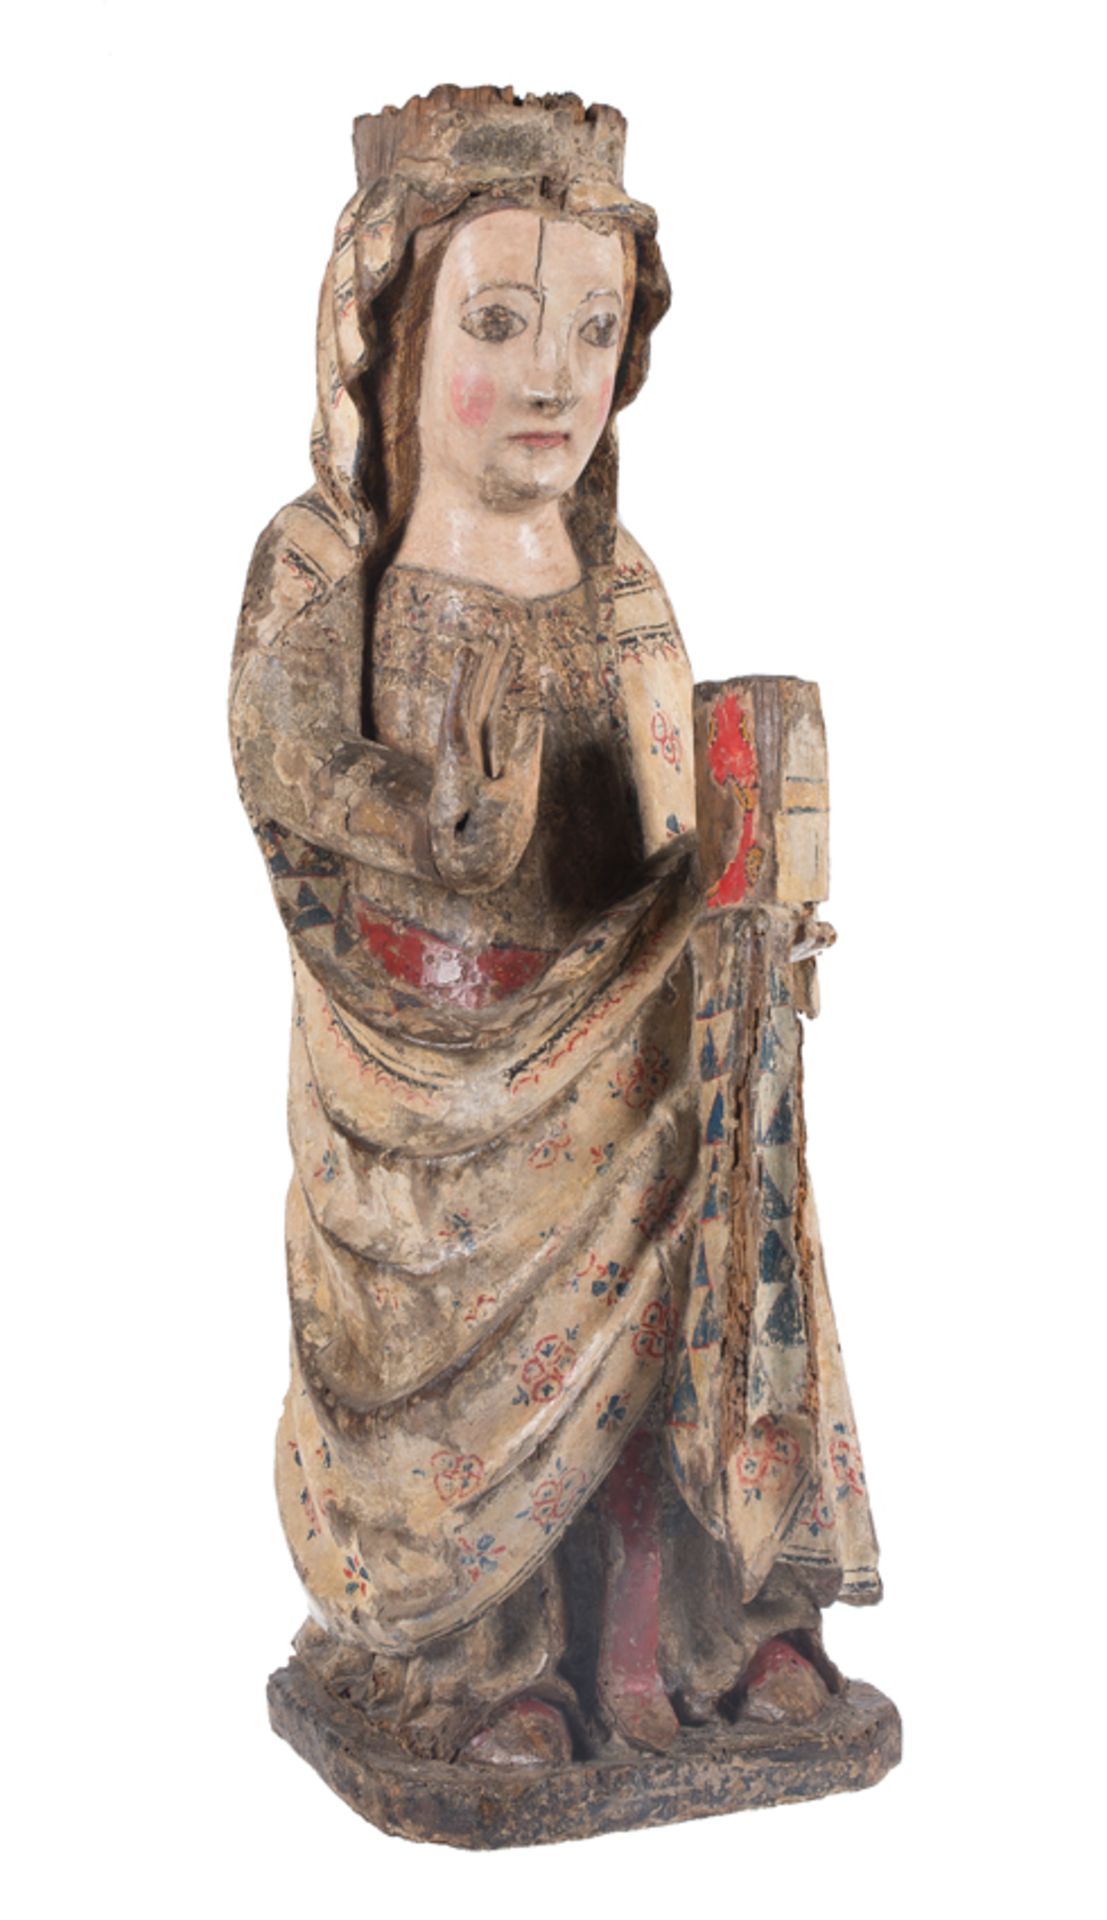 "Our Lady of the Annunciation". Carved and polychromed wooden sculpture. Castilian School. Transitio